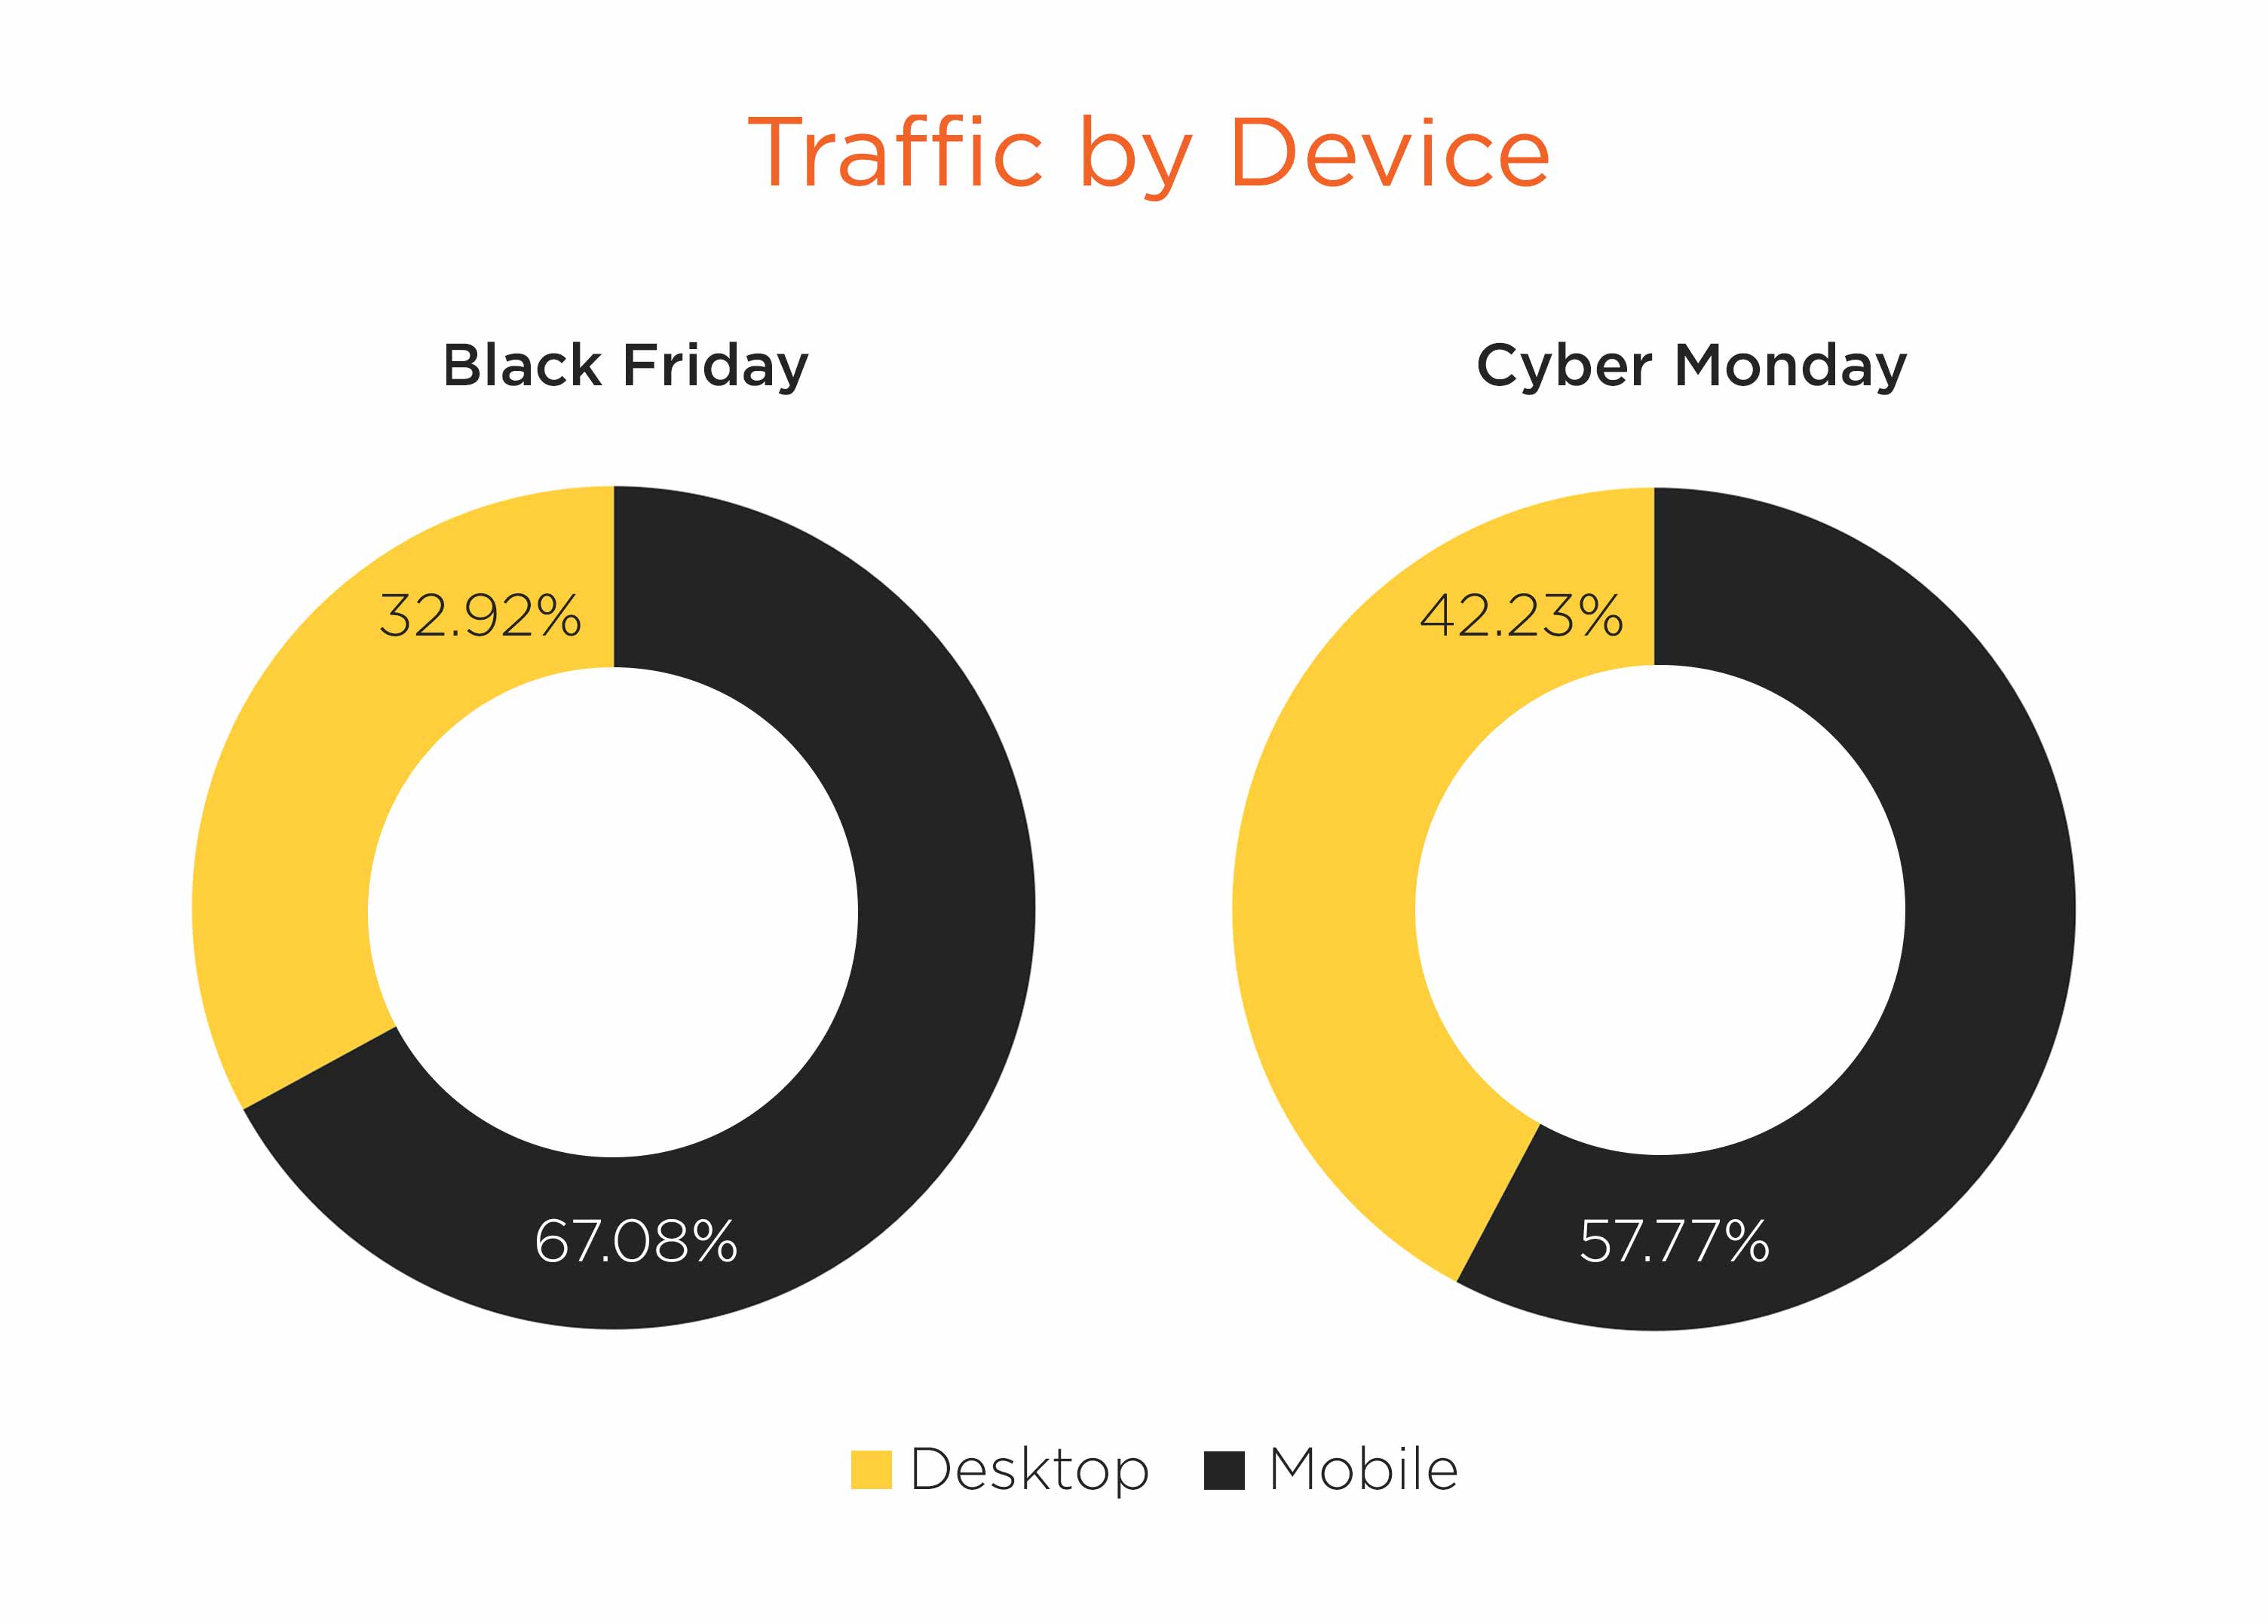 Black Friday and Cyber Monday Traffic by Device